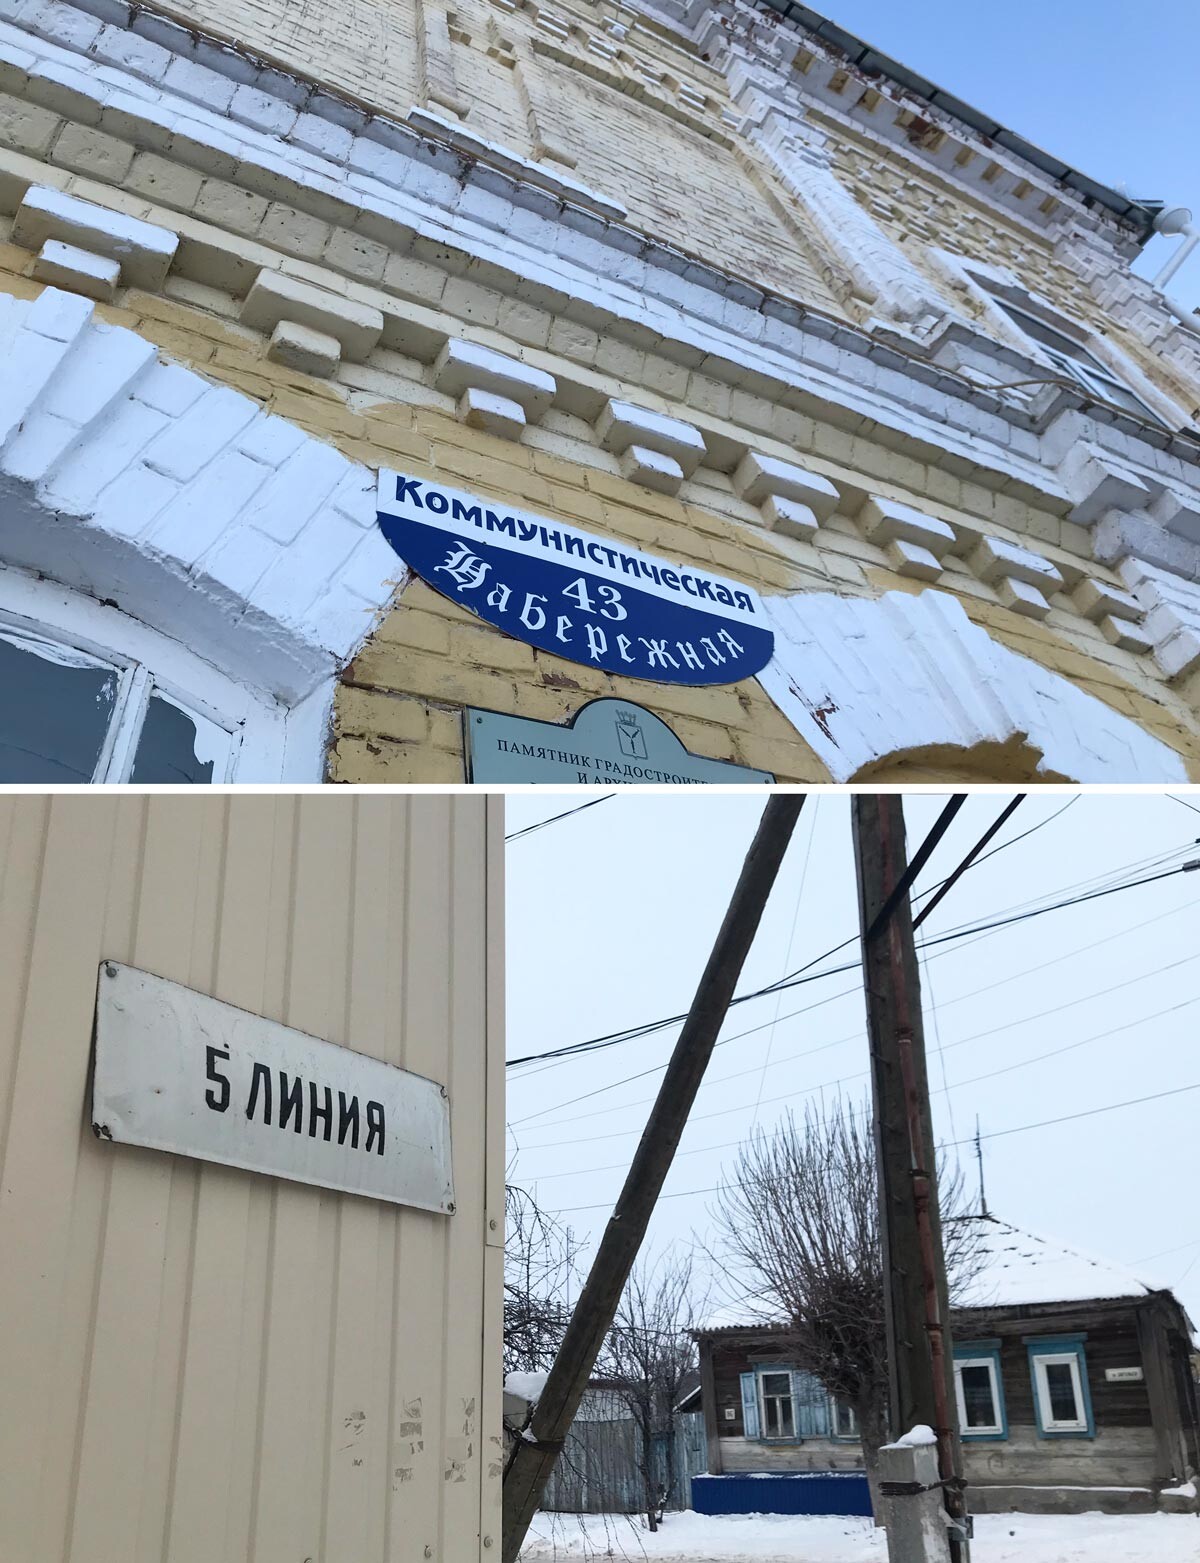 In Marx, some street names are written in gothic Cyrillic. Also, central streets are called 